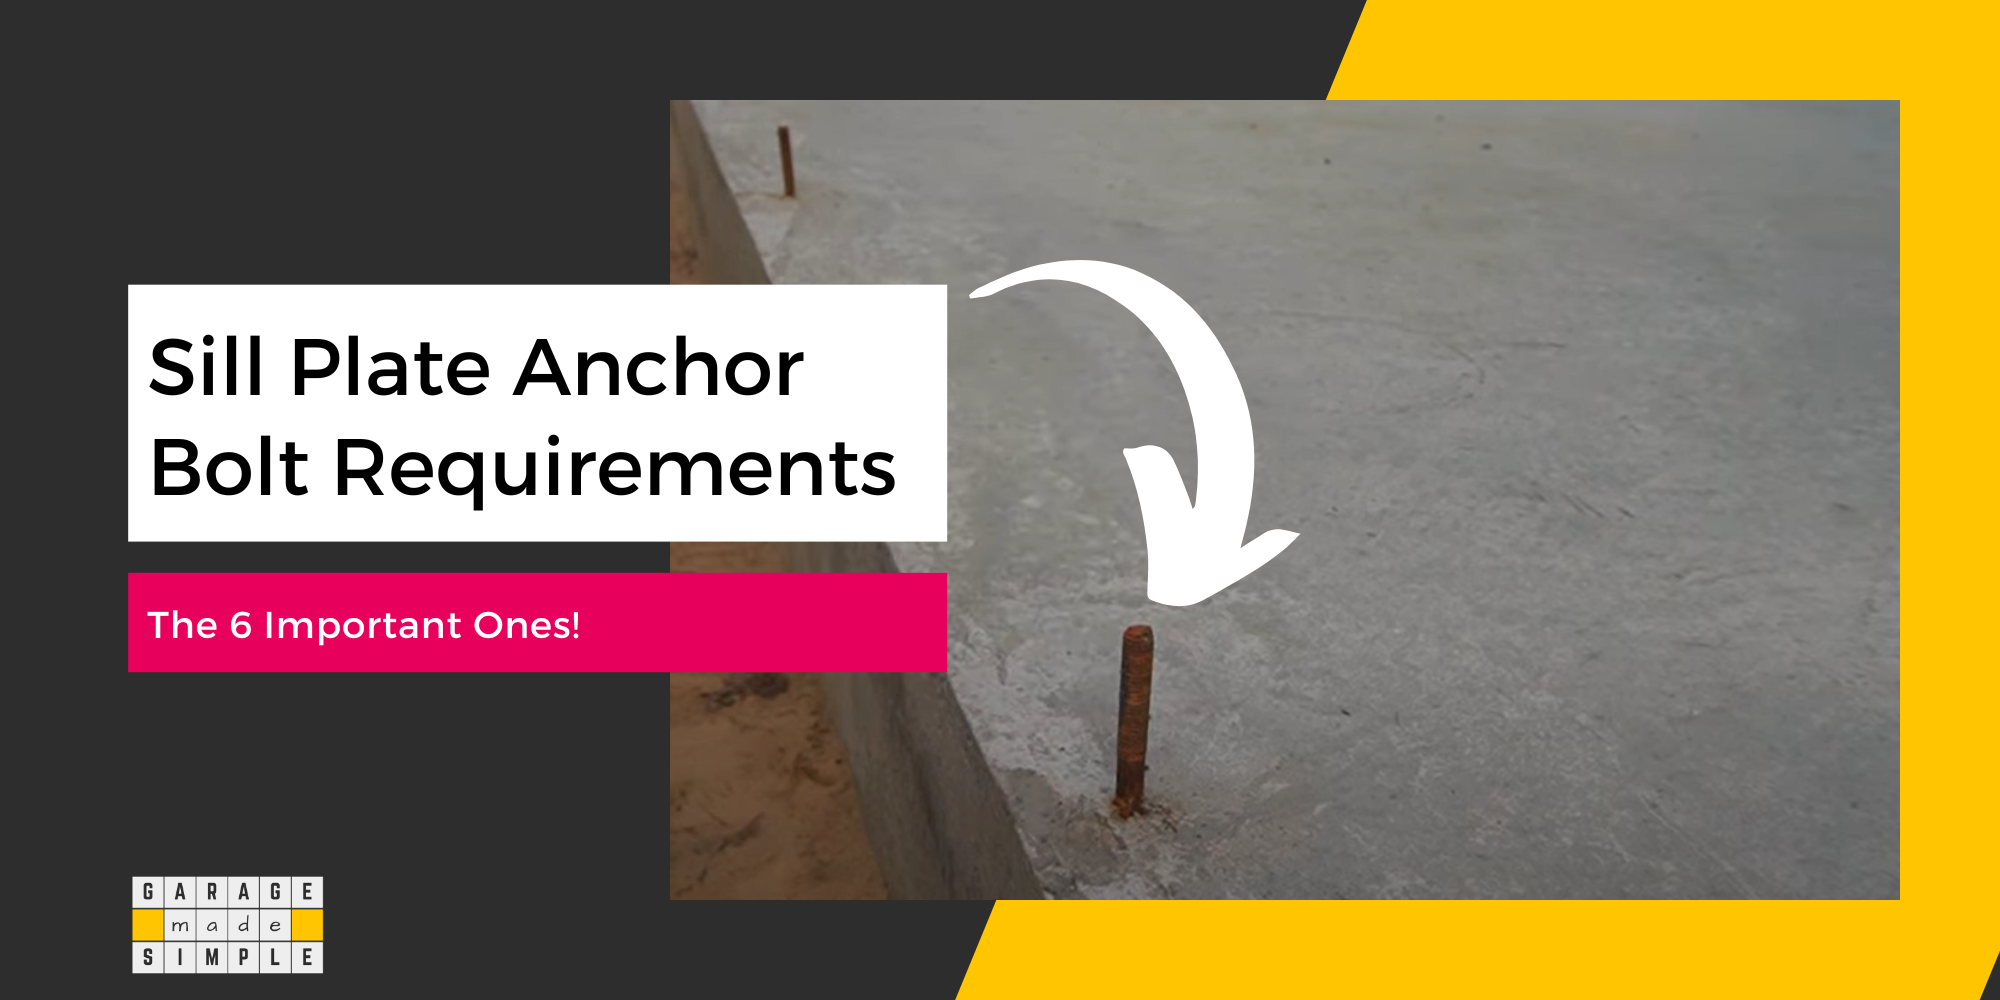 Sill Plate Anchor Bolt Requirements: 7 Important Ones!